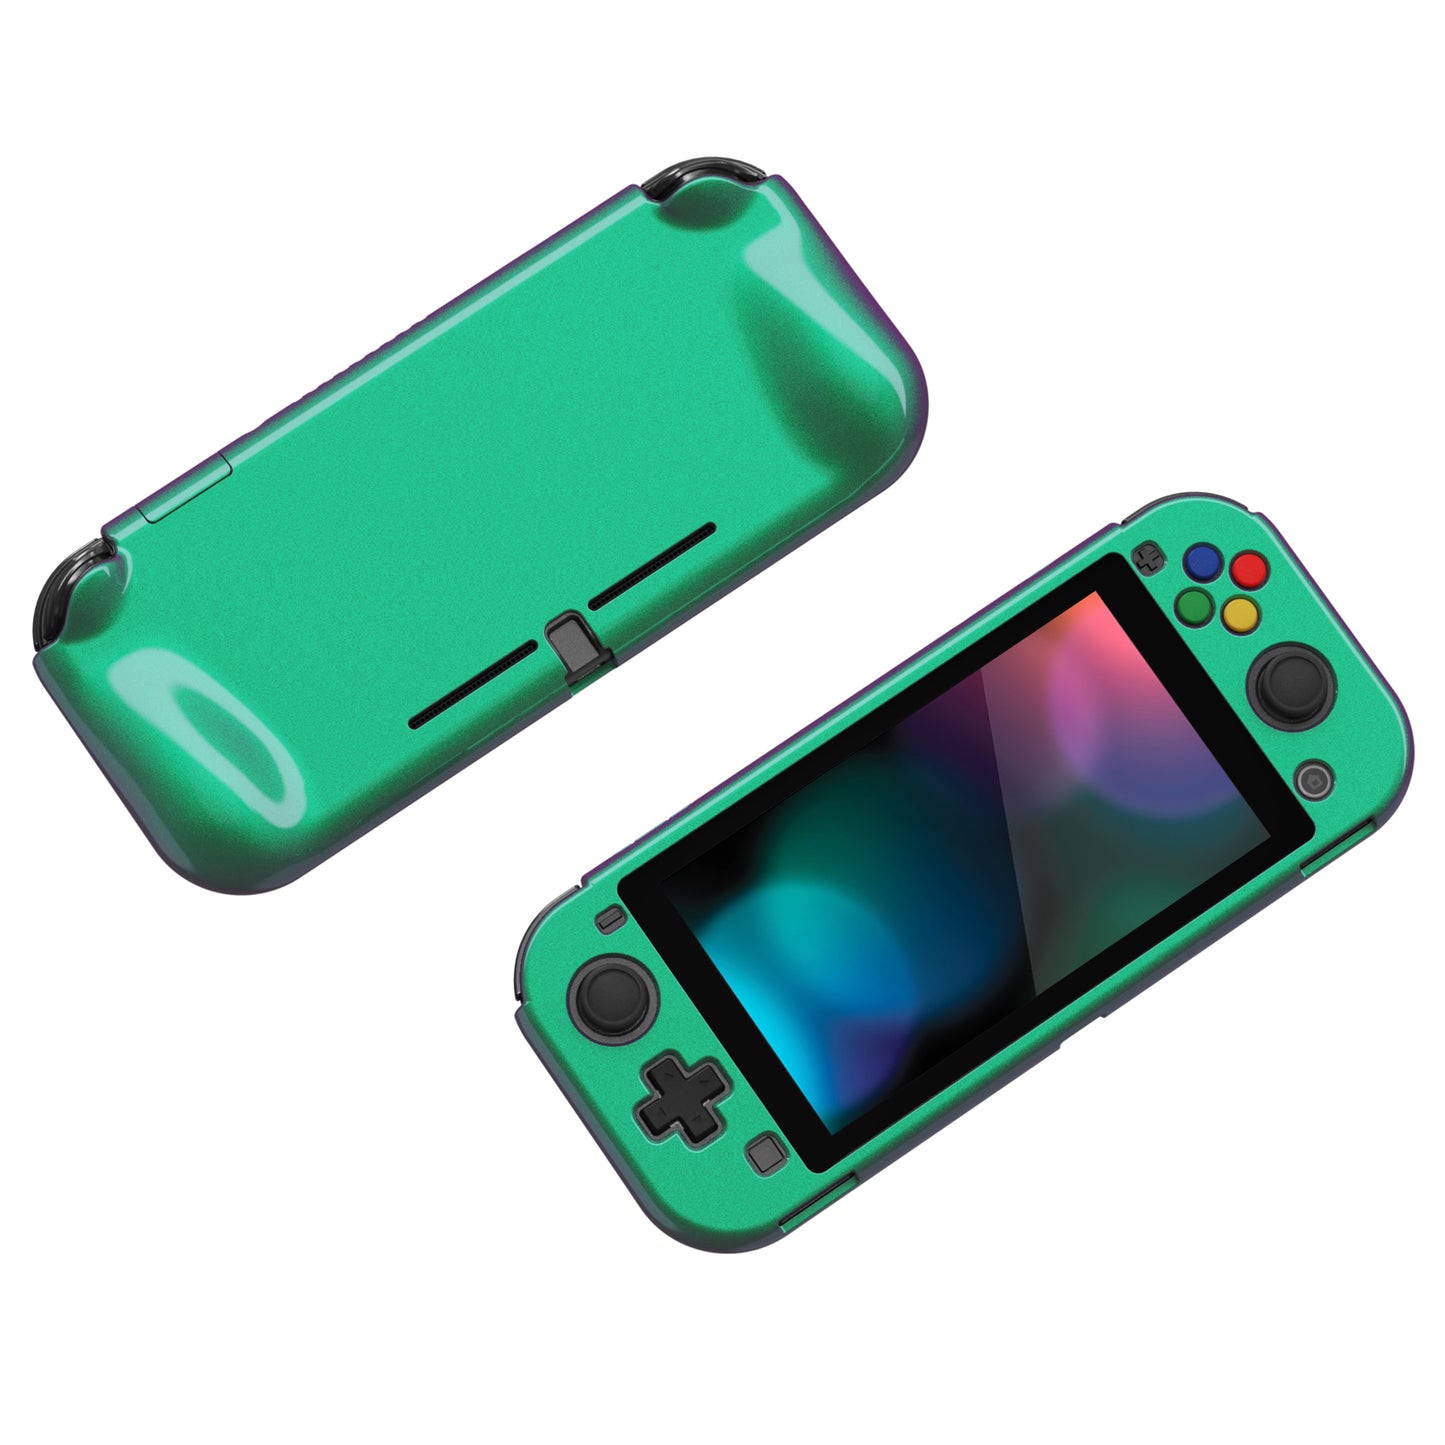 PlayVital ZealProtect Glossy Protective Case for Nintendo Switch Lite, Hard Shell Ergonomic Grip Cover for Switch Lite w/Screen Protector & Thumb Grip Caps & Button Caps - Chameleon Green Purple - PSLYP3008 playvital